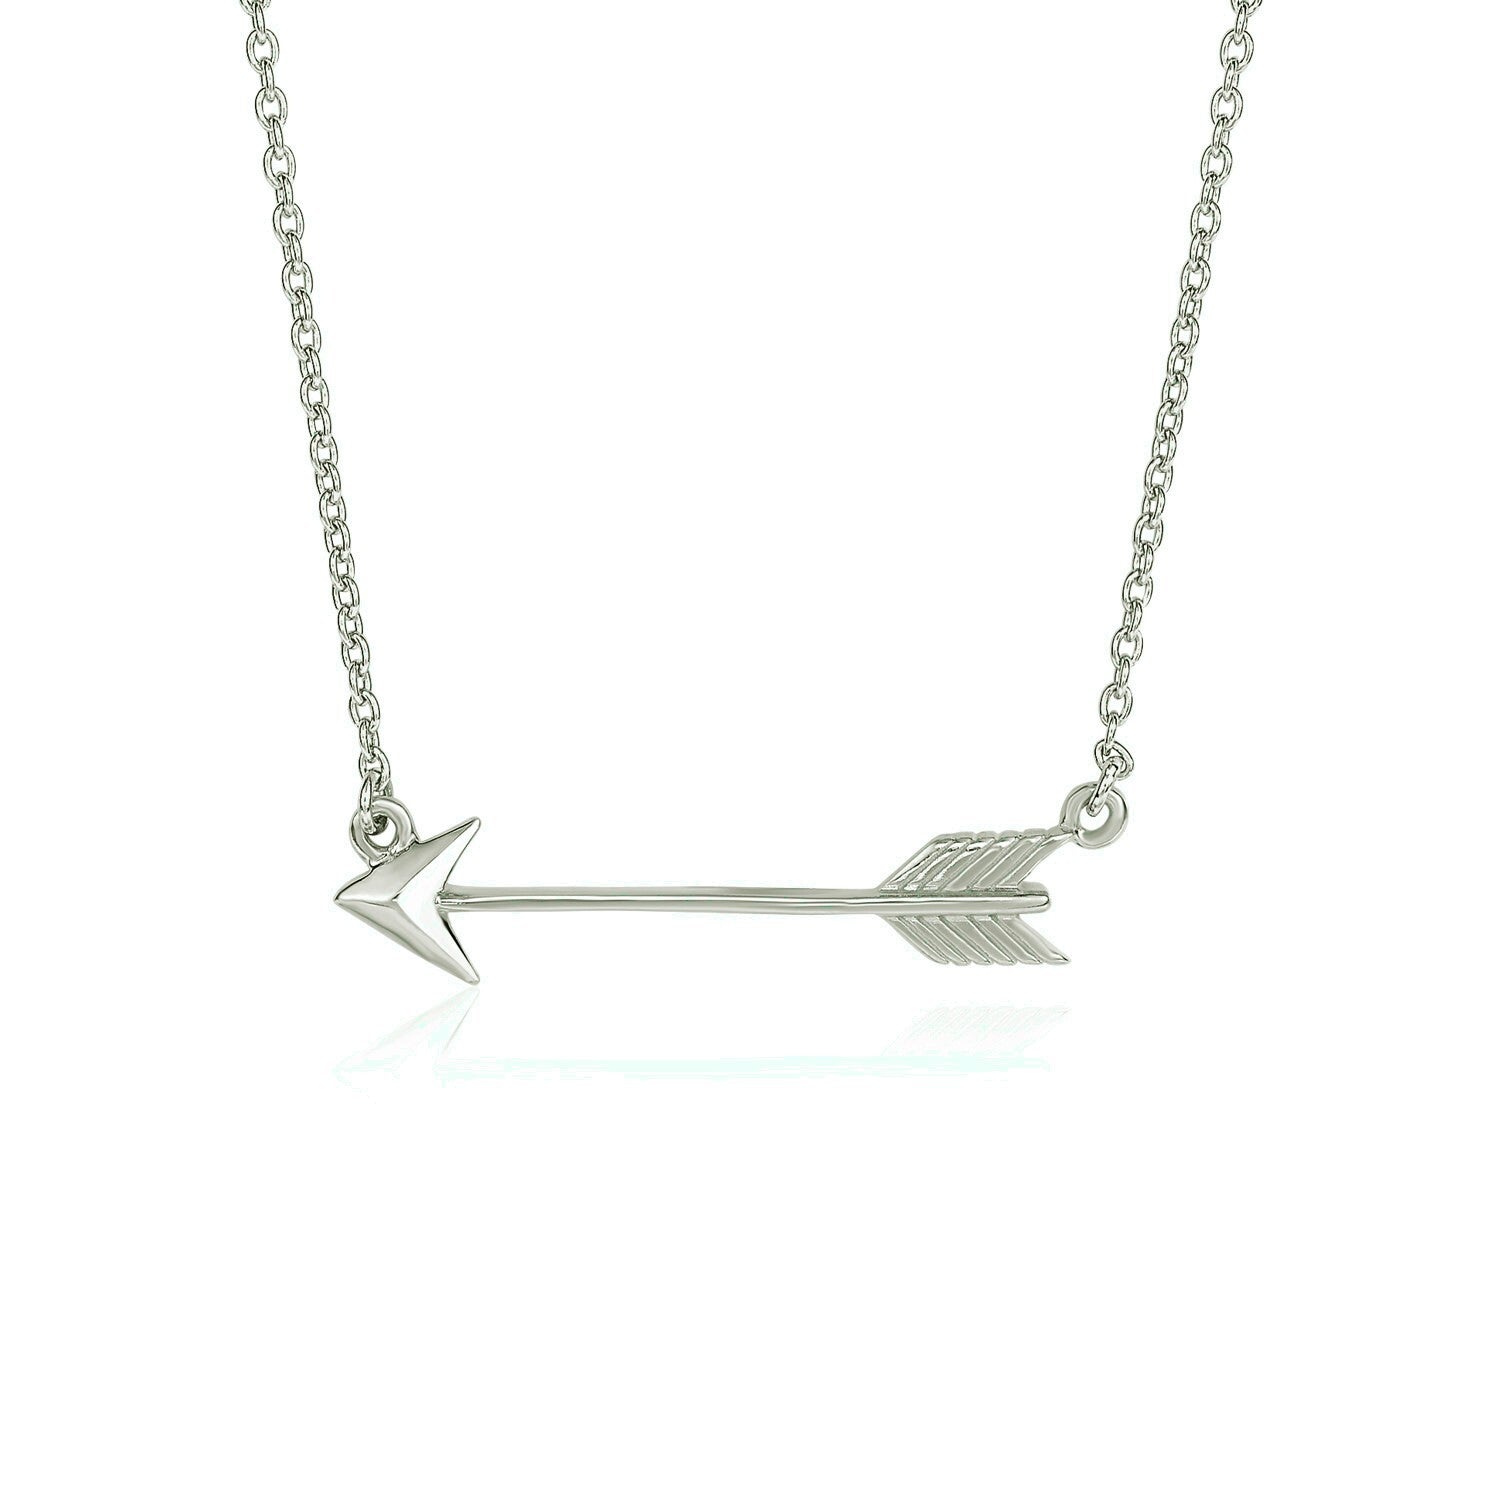 Necklace with Arrow in Sterling Silver, size 18''